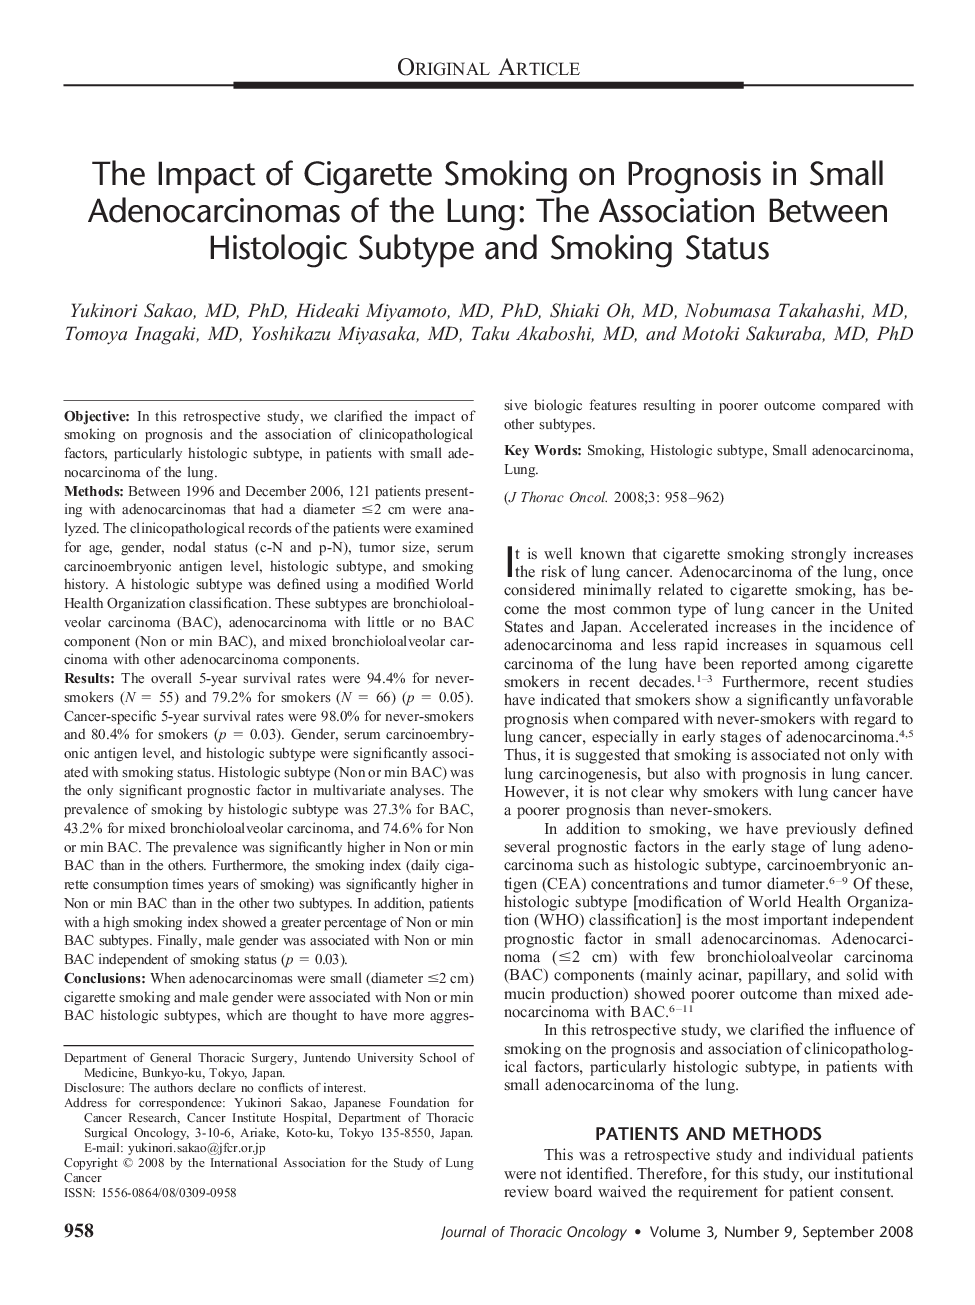 The Impact of Cigarette Smoking on Prognosis in Small Adenocarcinomas of the Lung: The Association Between Histologic Subtype and Smoking Status